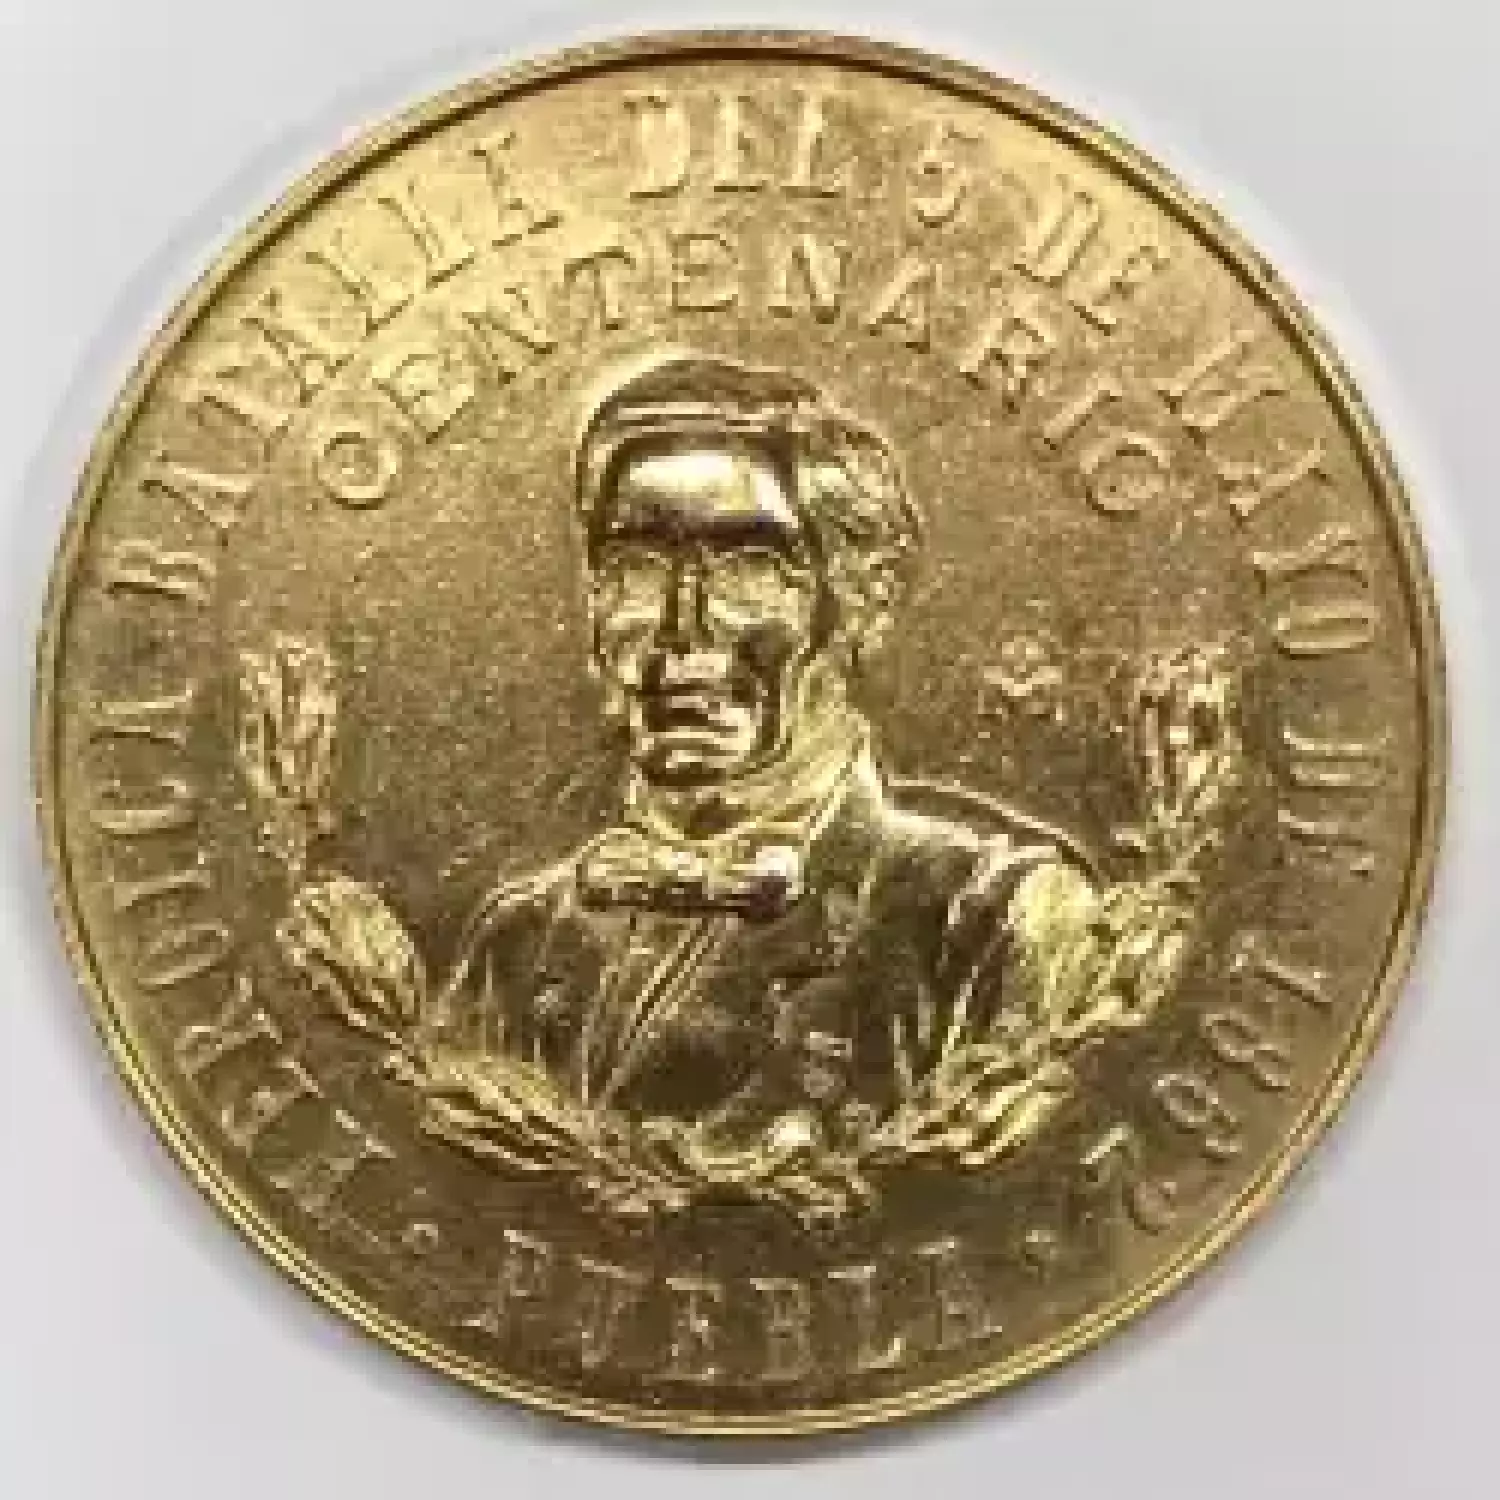 Mexico Official Mint Medal